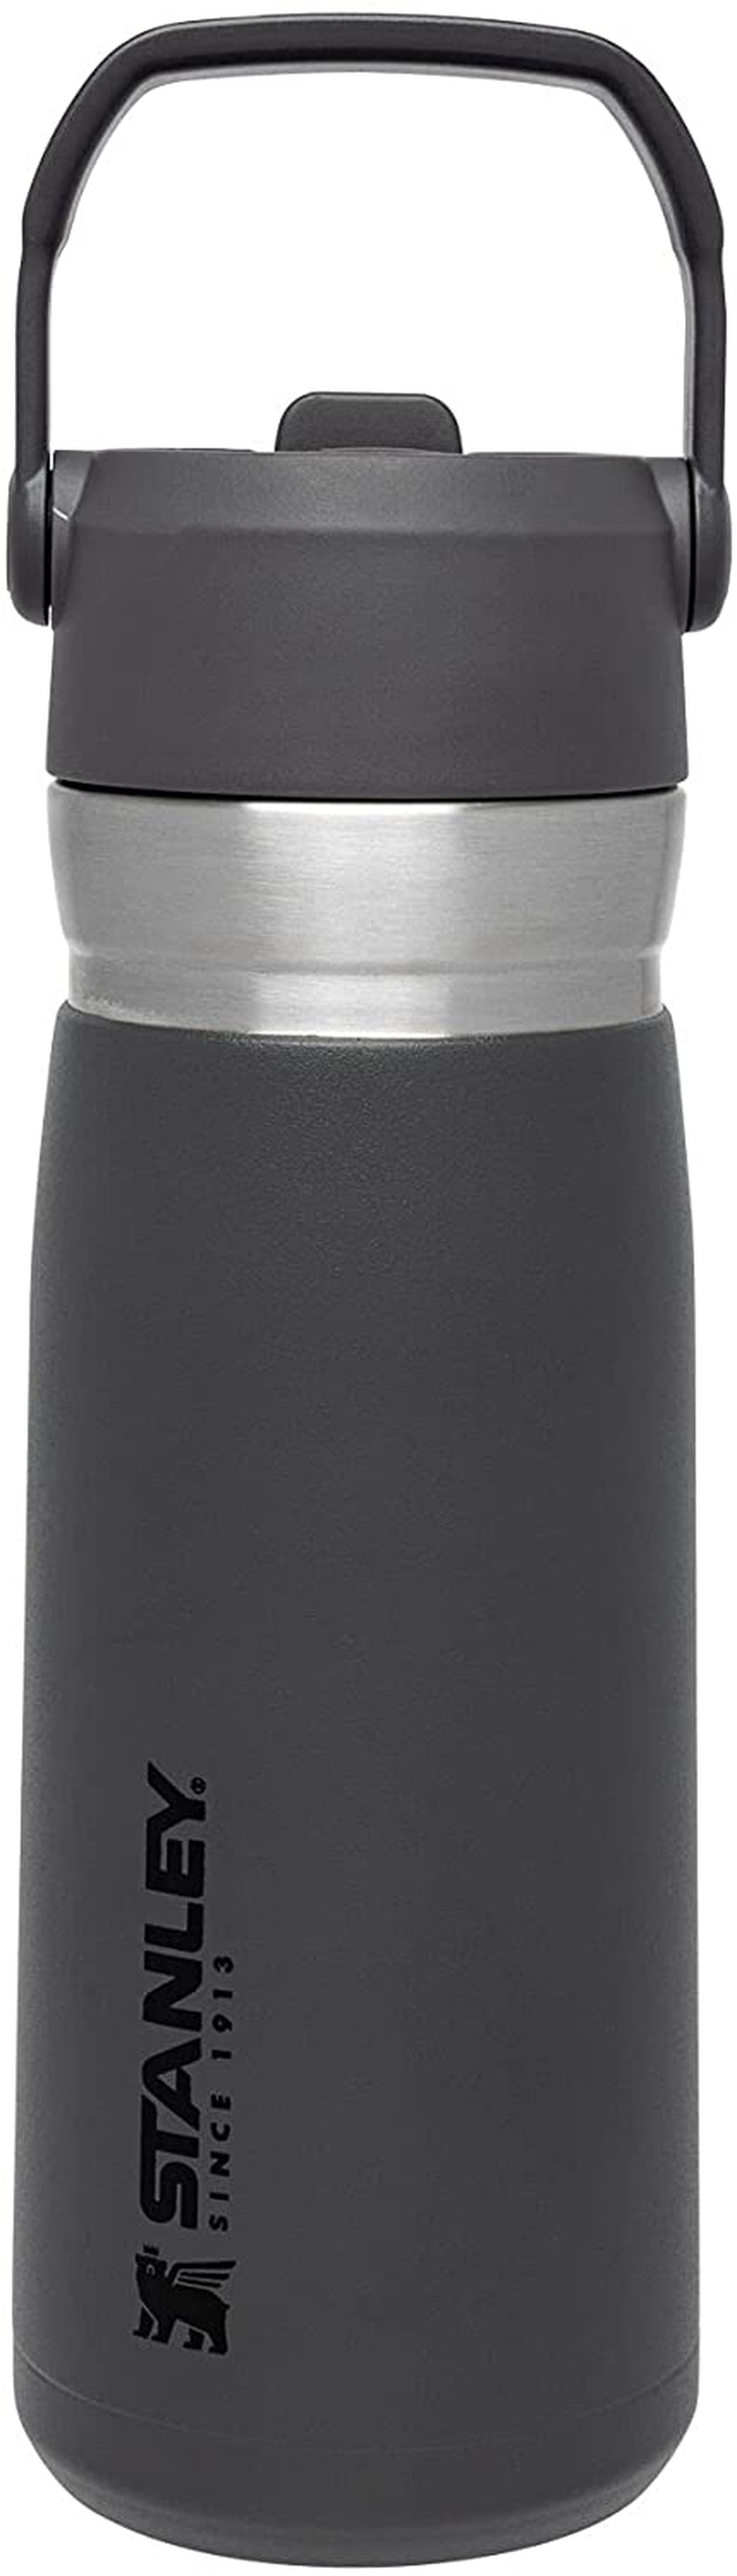 Stanley IceFlow Stainless Steel Bottle with Straw, Vacuum Insulated Water Bottle for Home, Office or Car, Reusable Leakproof Cup with Straw and Handle